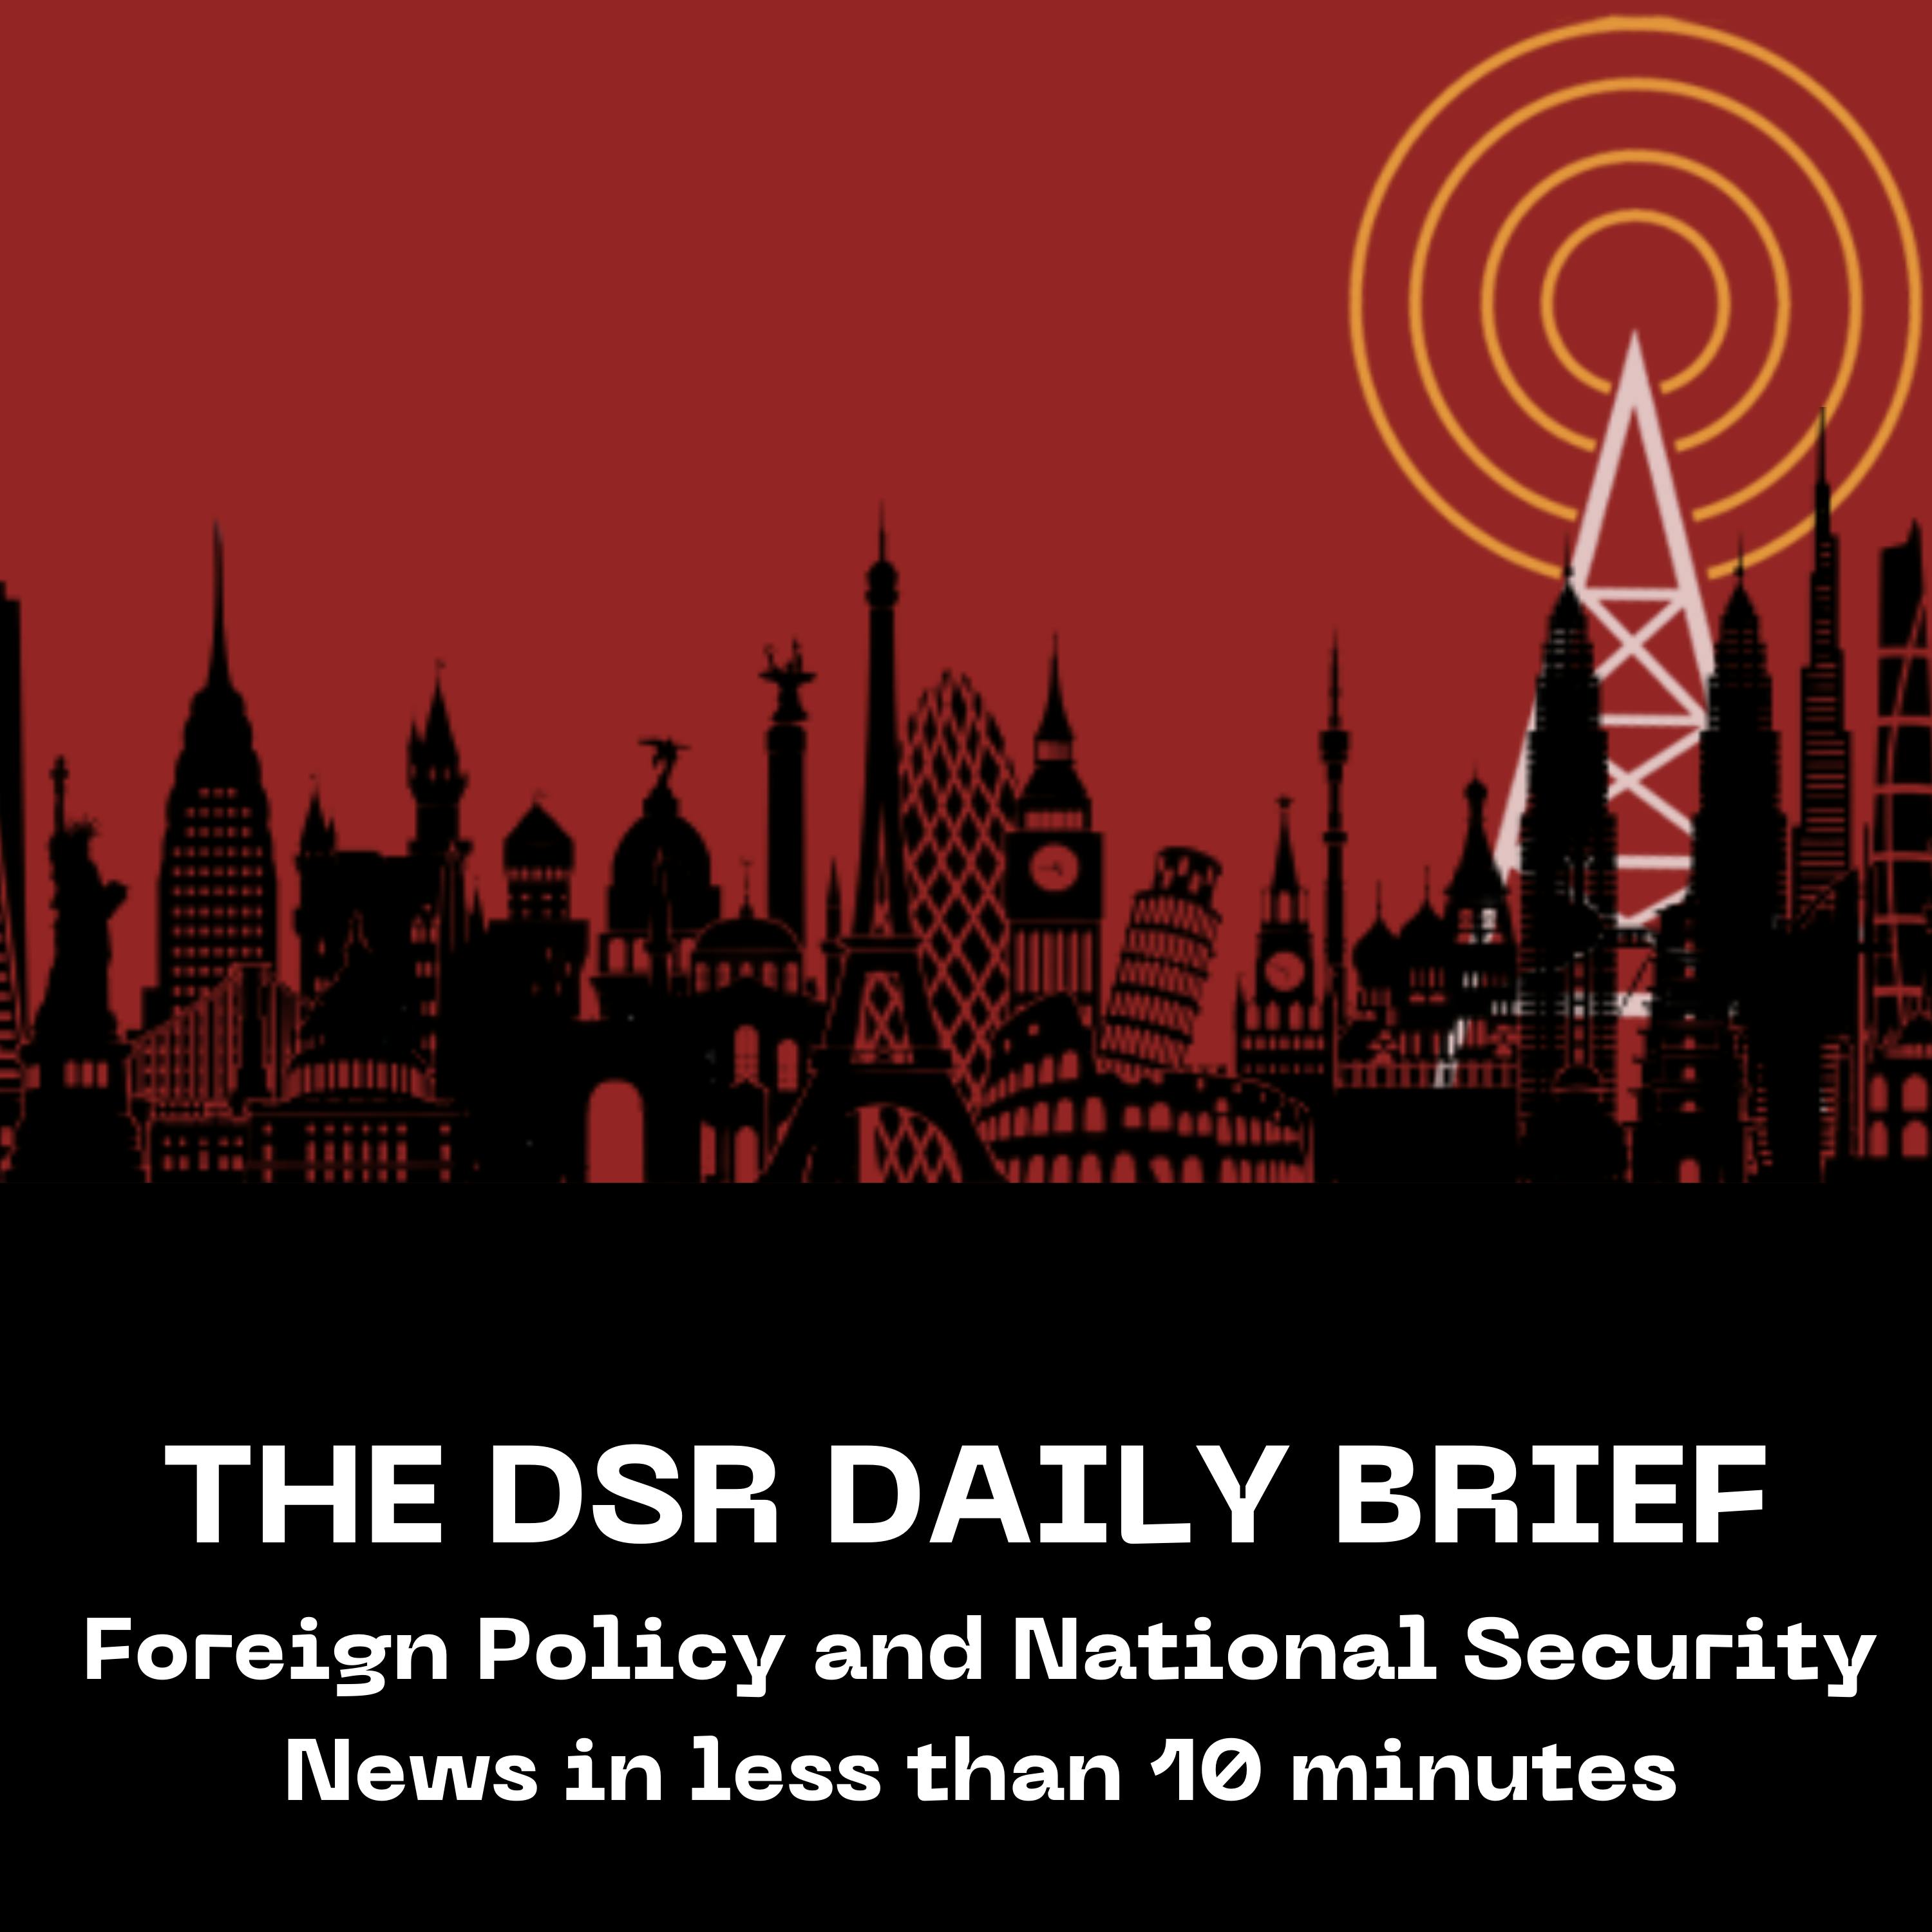 The DSR Daily for March 20: Vietnam’s President Resigns, Famine Looms in Sudan